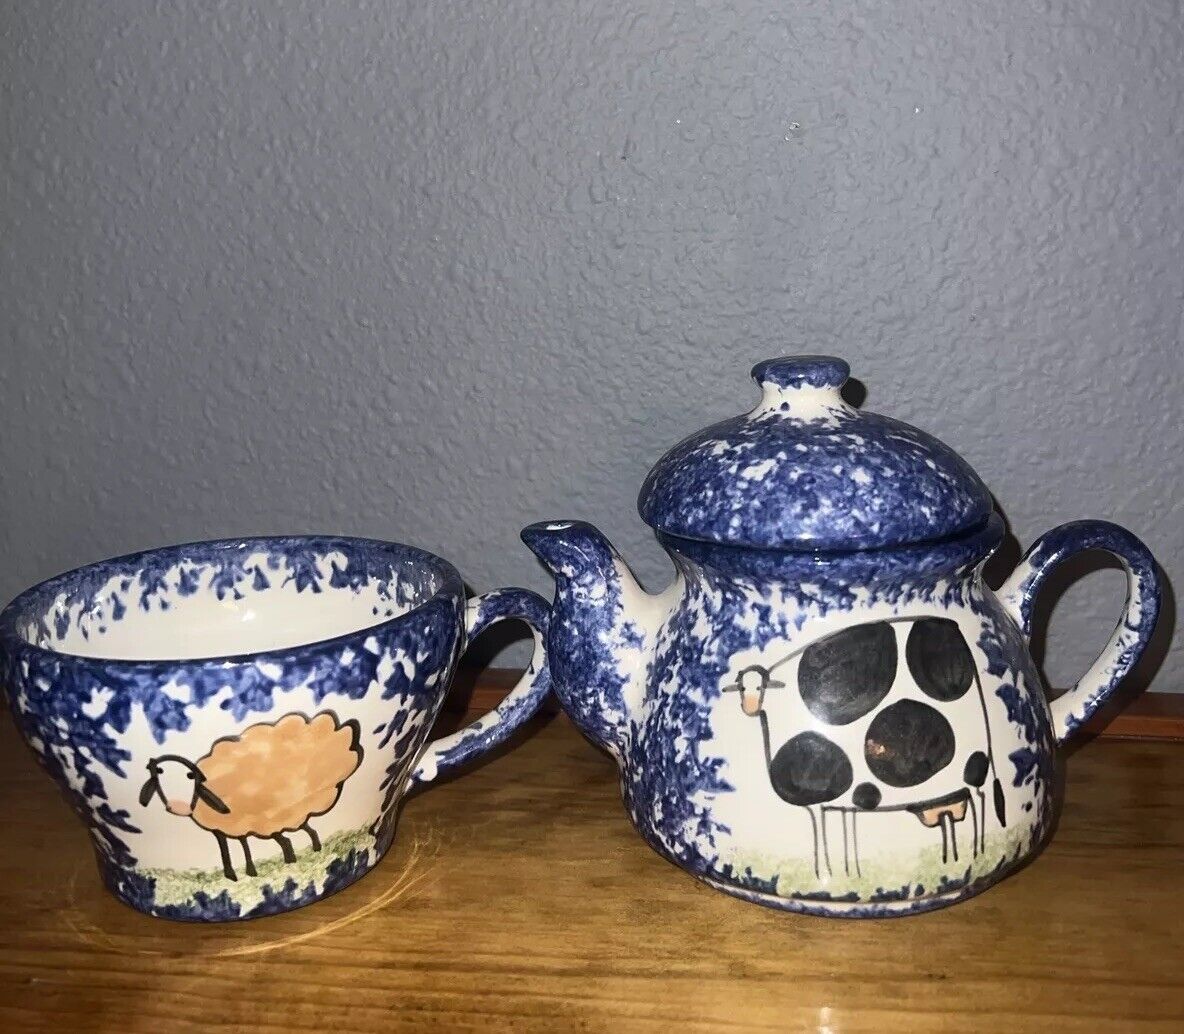 Molly Dallas Blue Spatterware Teapot And Cup Sheep & Cow Blue Ceramic Coffee Pot